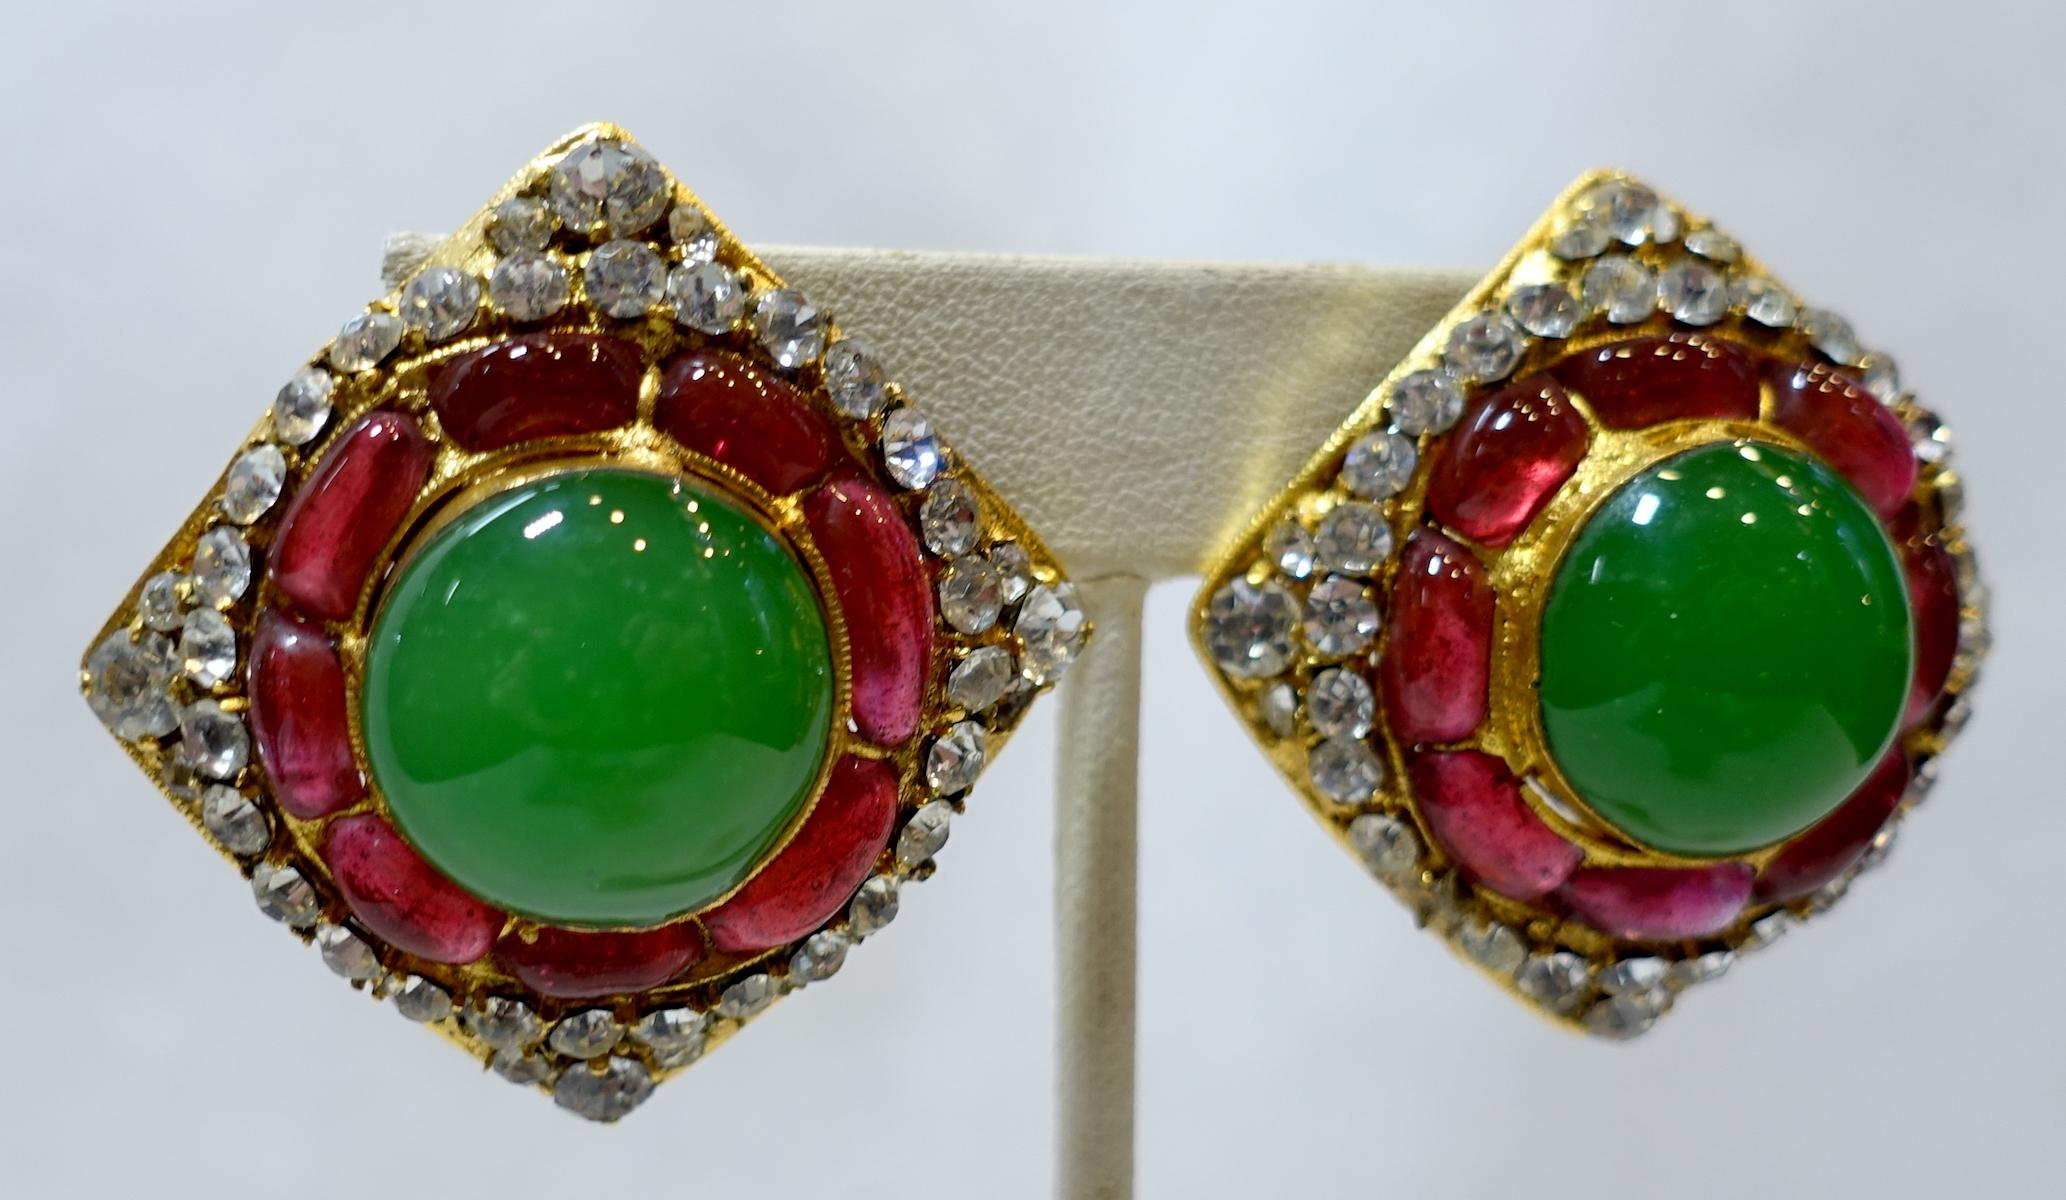 These vintage signed Chanel 26 (1974) earrings feature a center green Gripoix glass cabochon stone accented by cranberry red Gripoix glass stones and brilliant crystals in a gold tone setting.  In excellent condition, these clip earrings measure